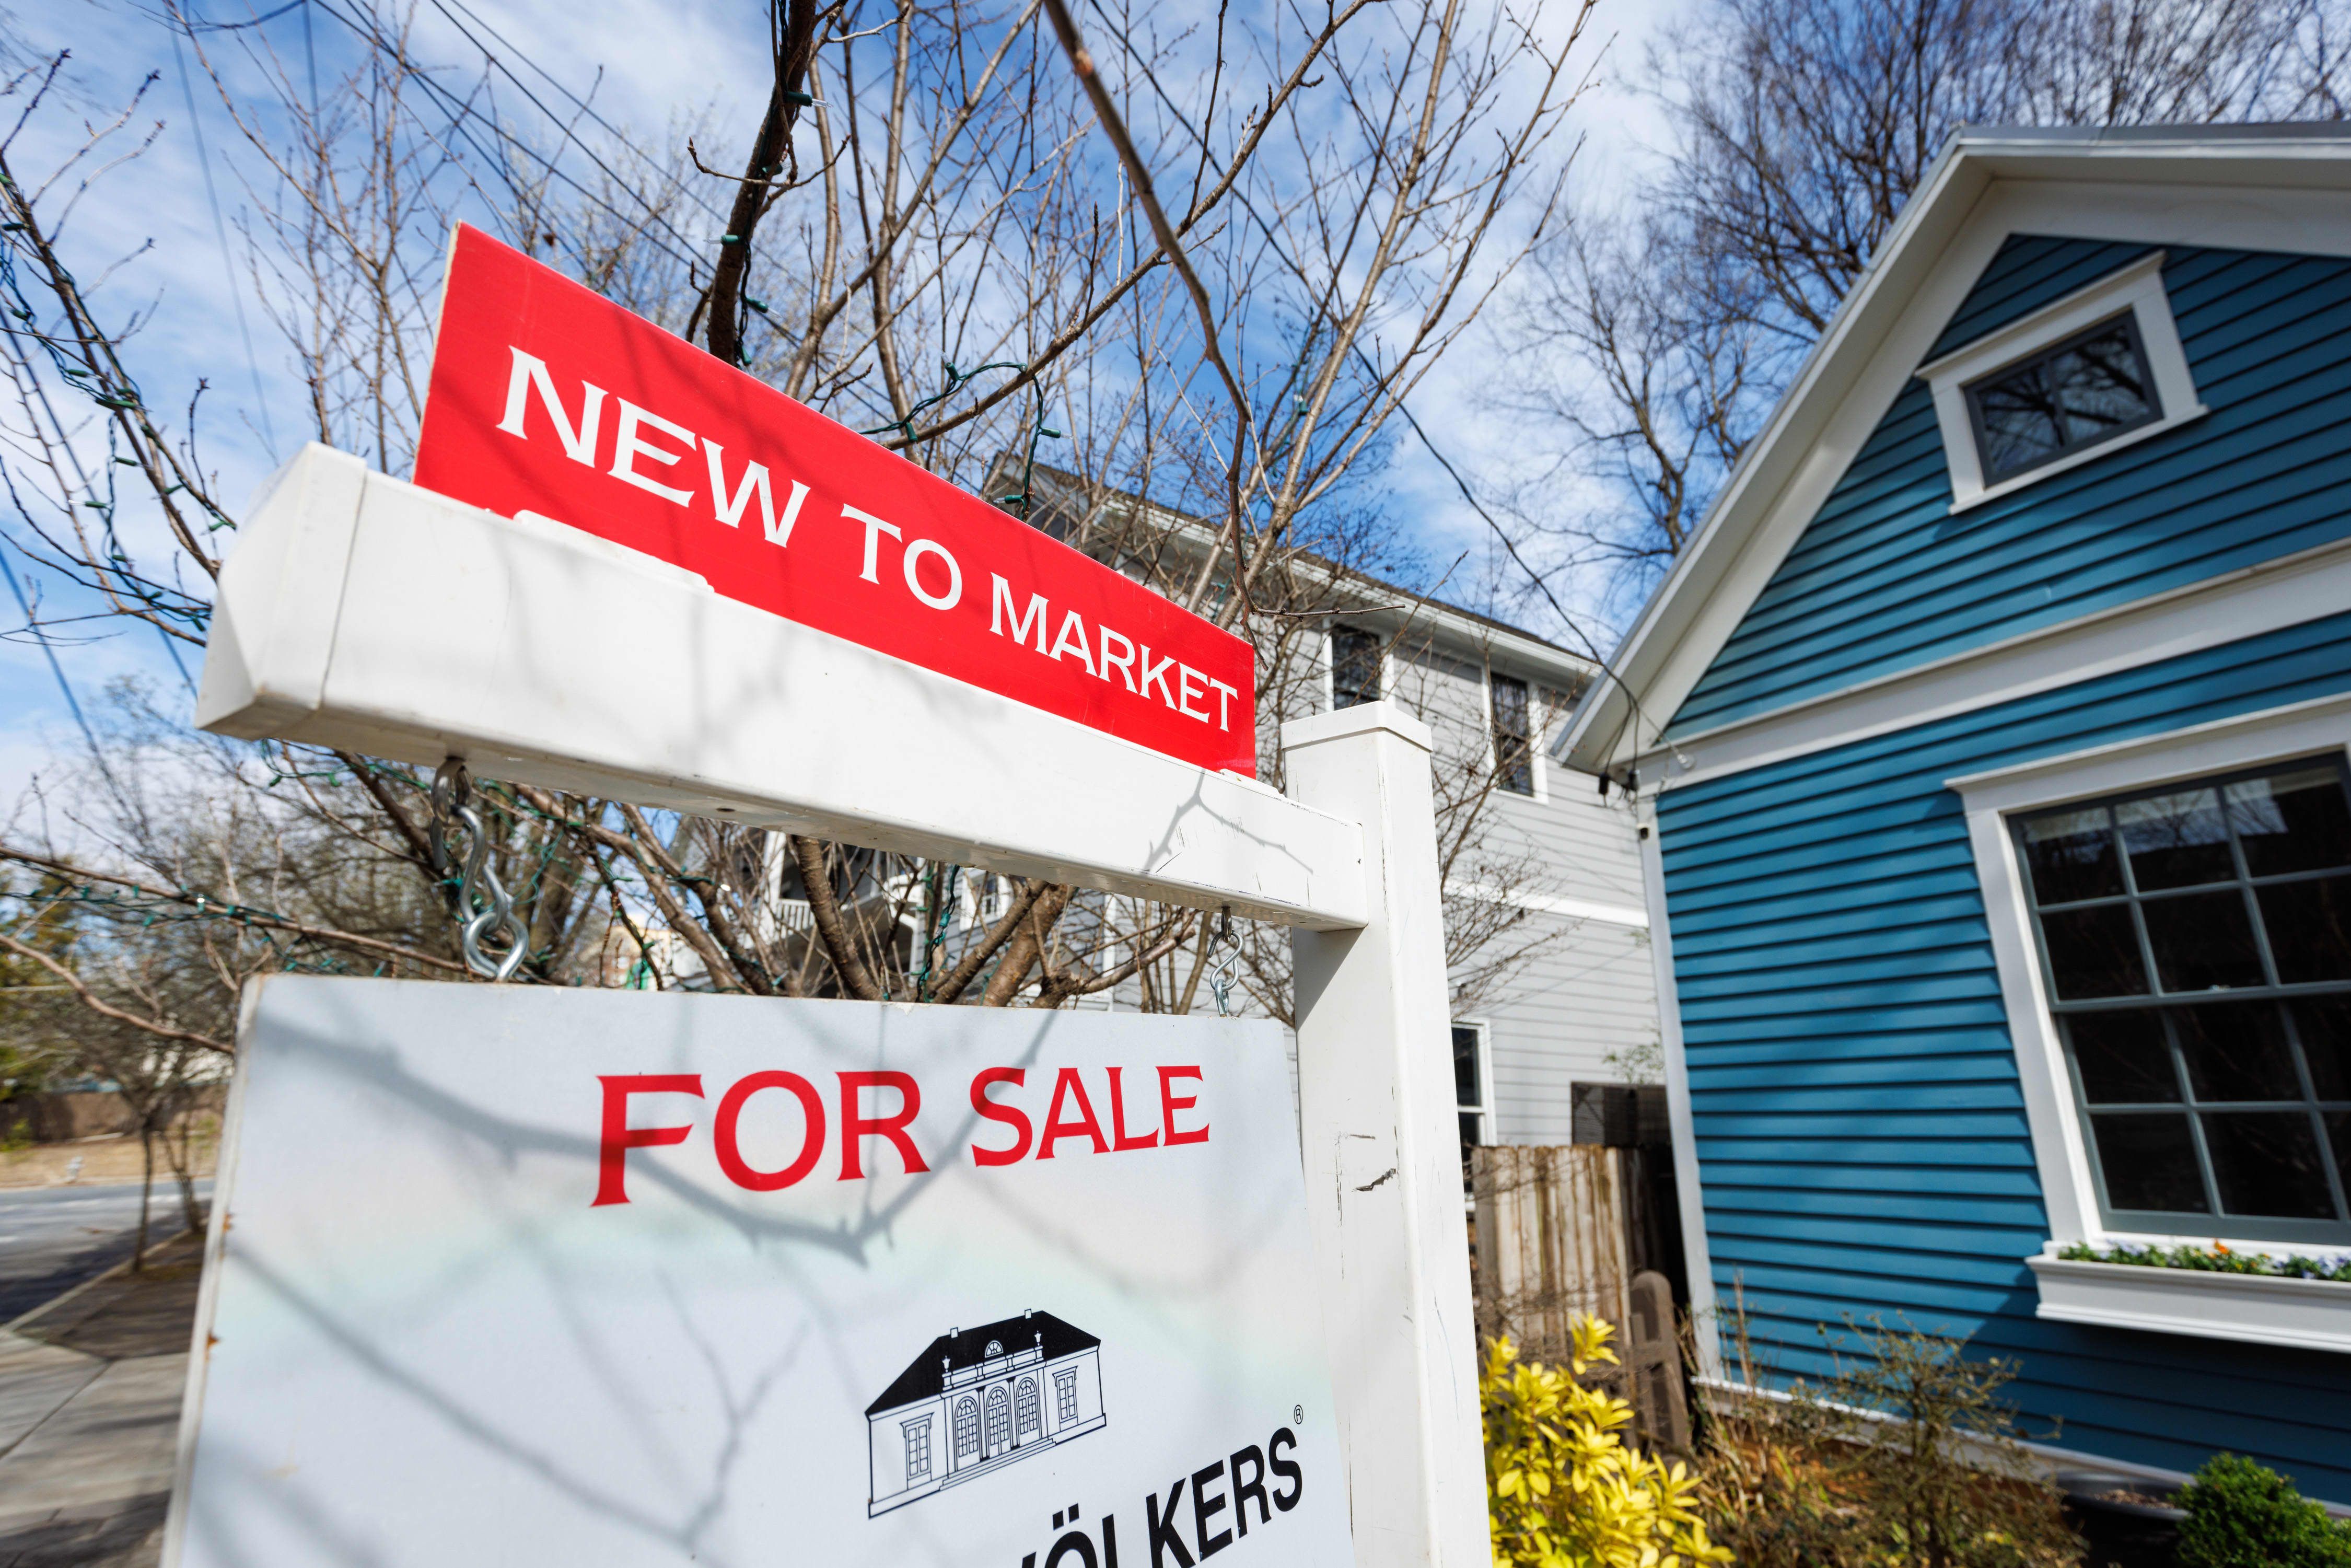 Mortgage demand is recovering slightly, despite higher interest rates